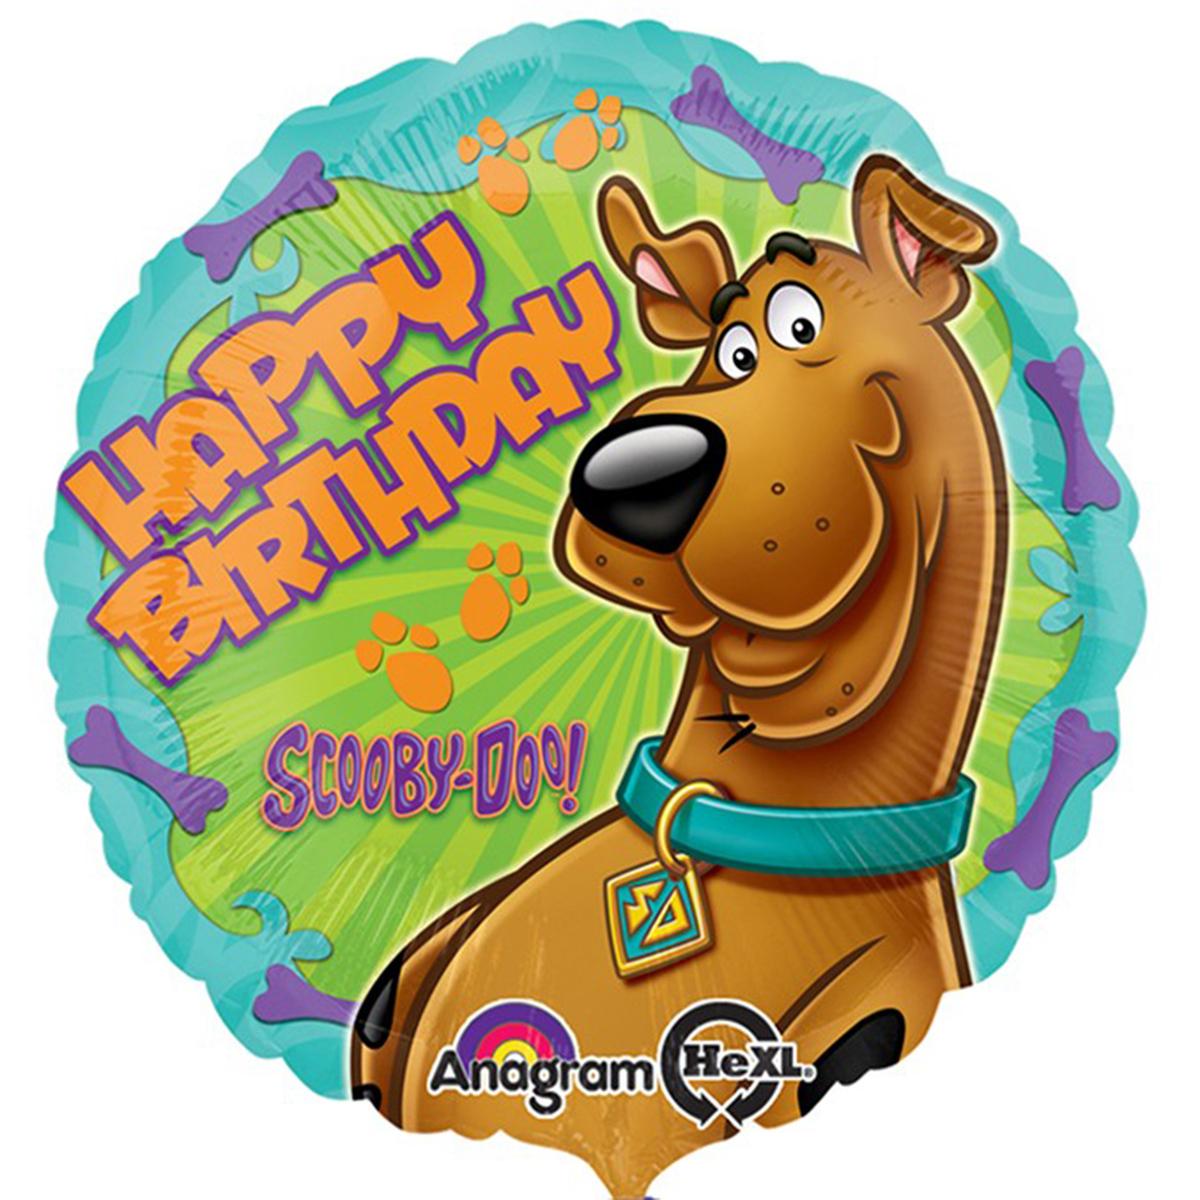 Scooby Doo Foil Balloon 45cm Balloons & Streamers - Party Centre - Party Centre